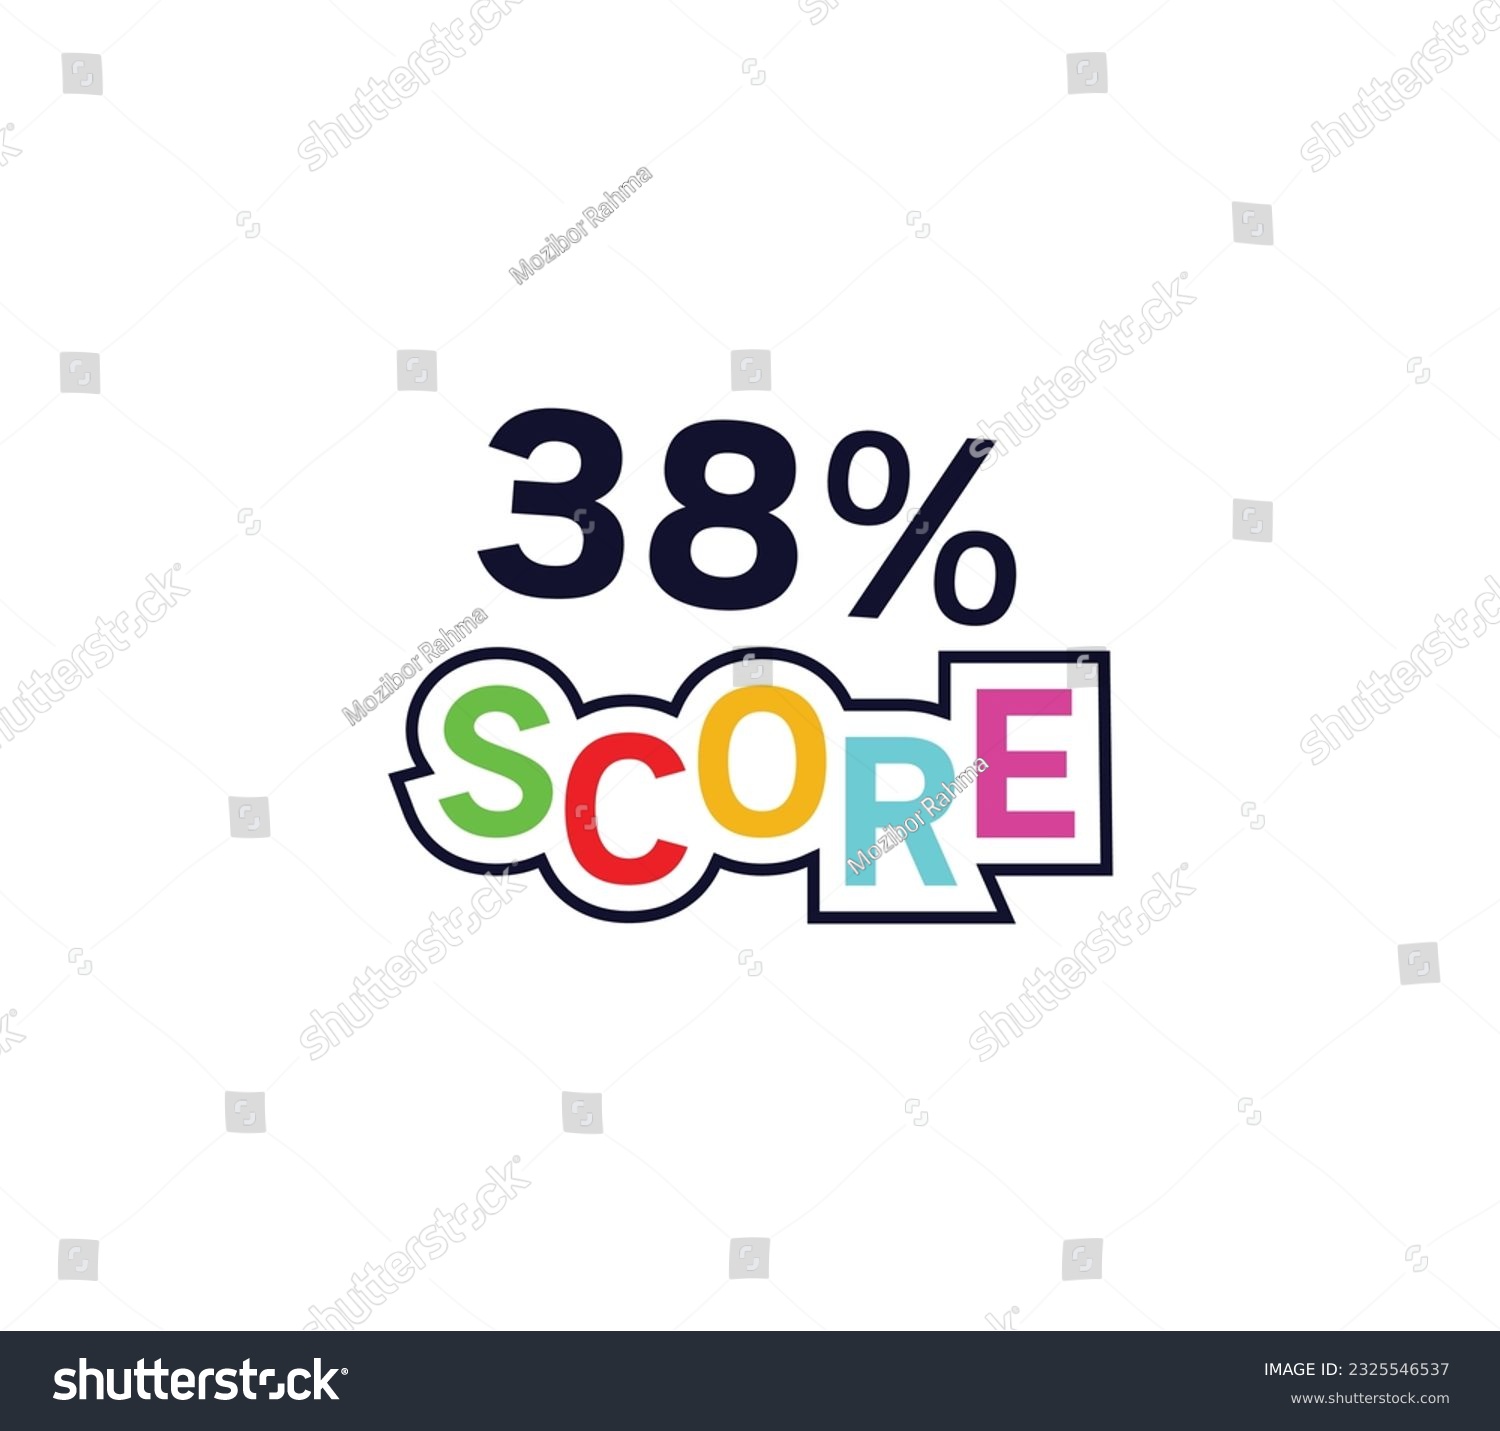 38% Score Sign Designed to catch the eye and  illustration art with fantastic font various combination in white background #2325546537